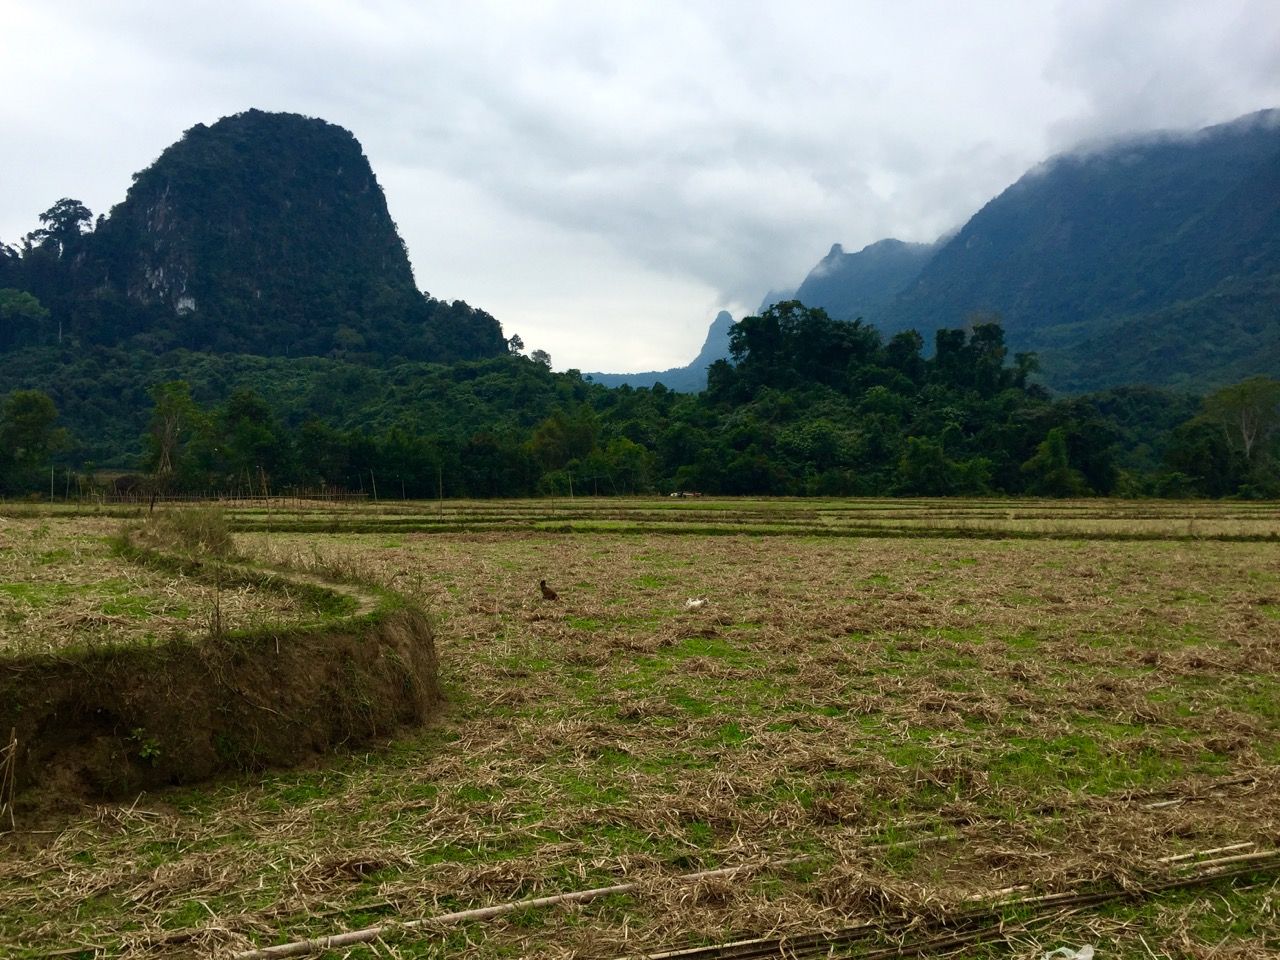 Rice fields with mountains on the horizon.